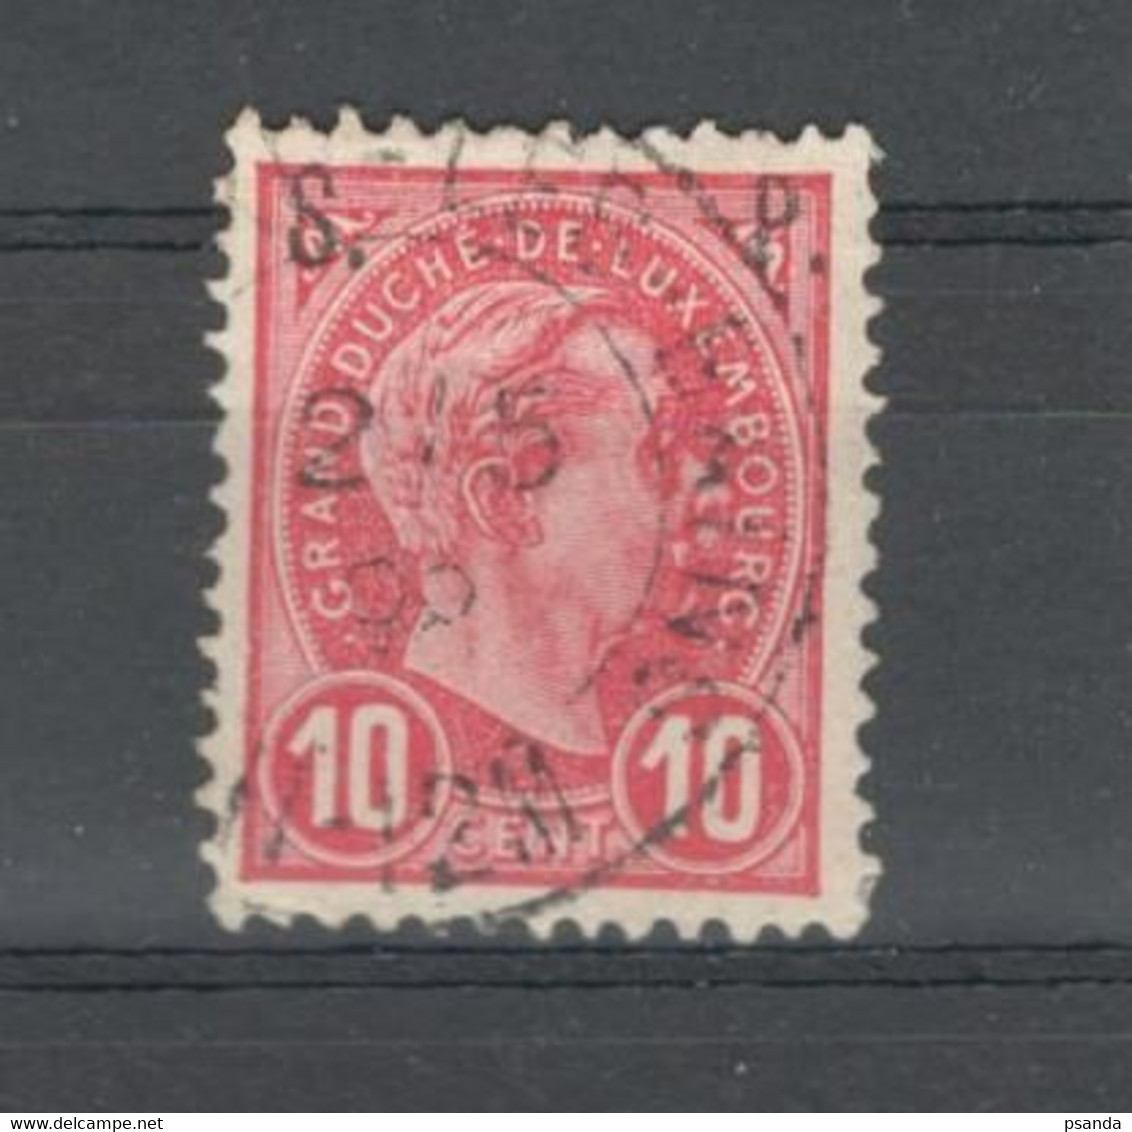 Luxembourg 1895 Mino. 61used OFFICIAL STAMP - 1895 Adolphe Right-hand Side